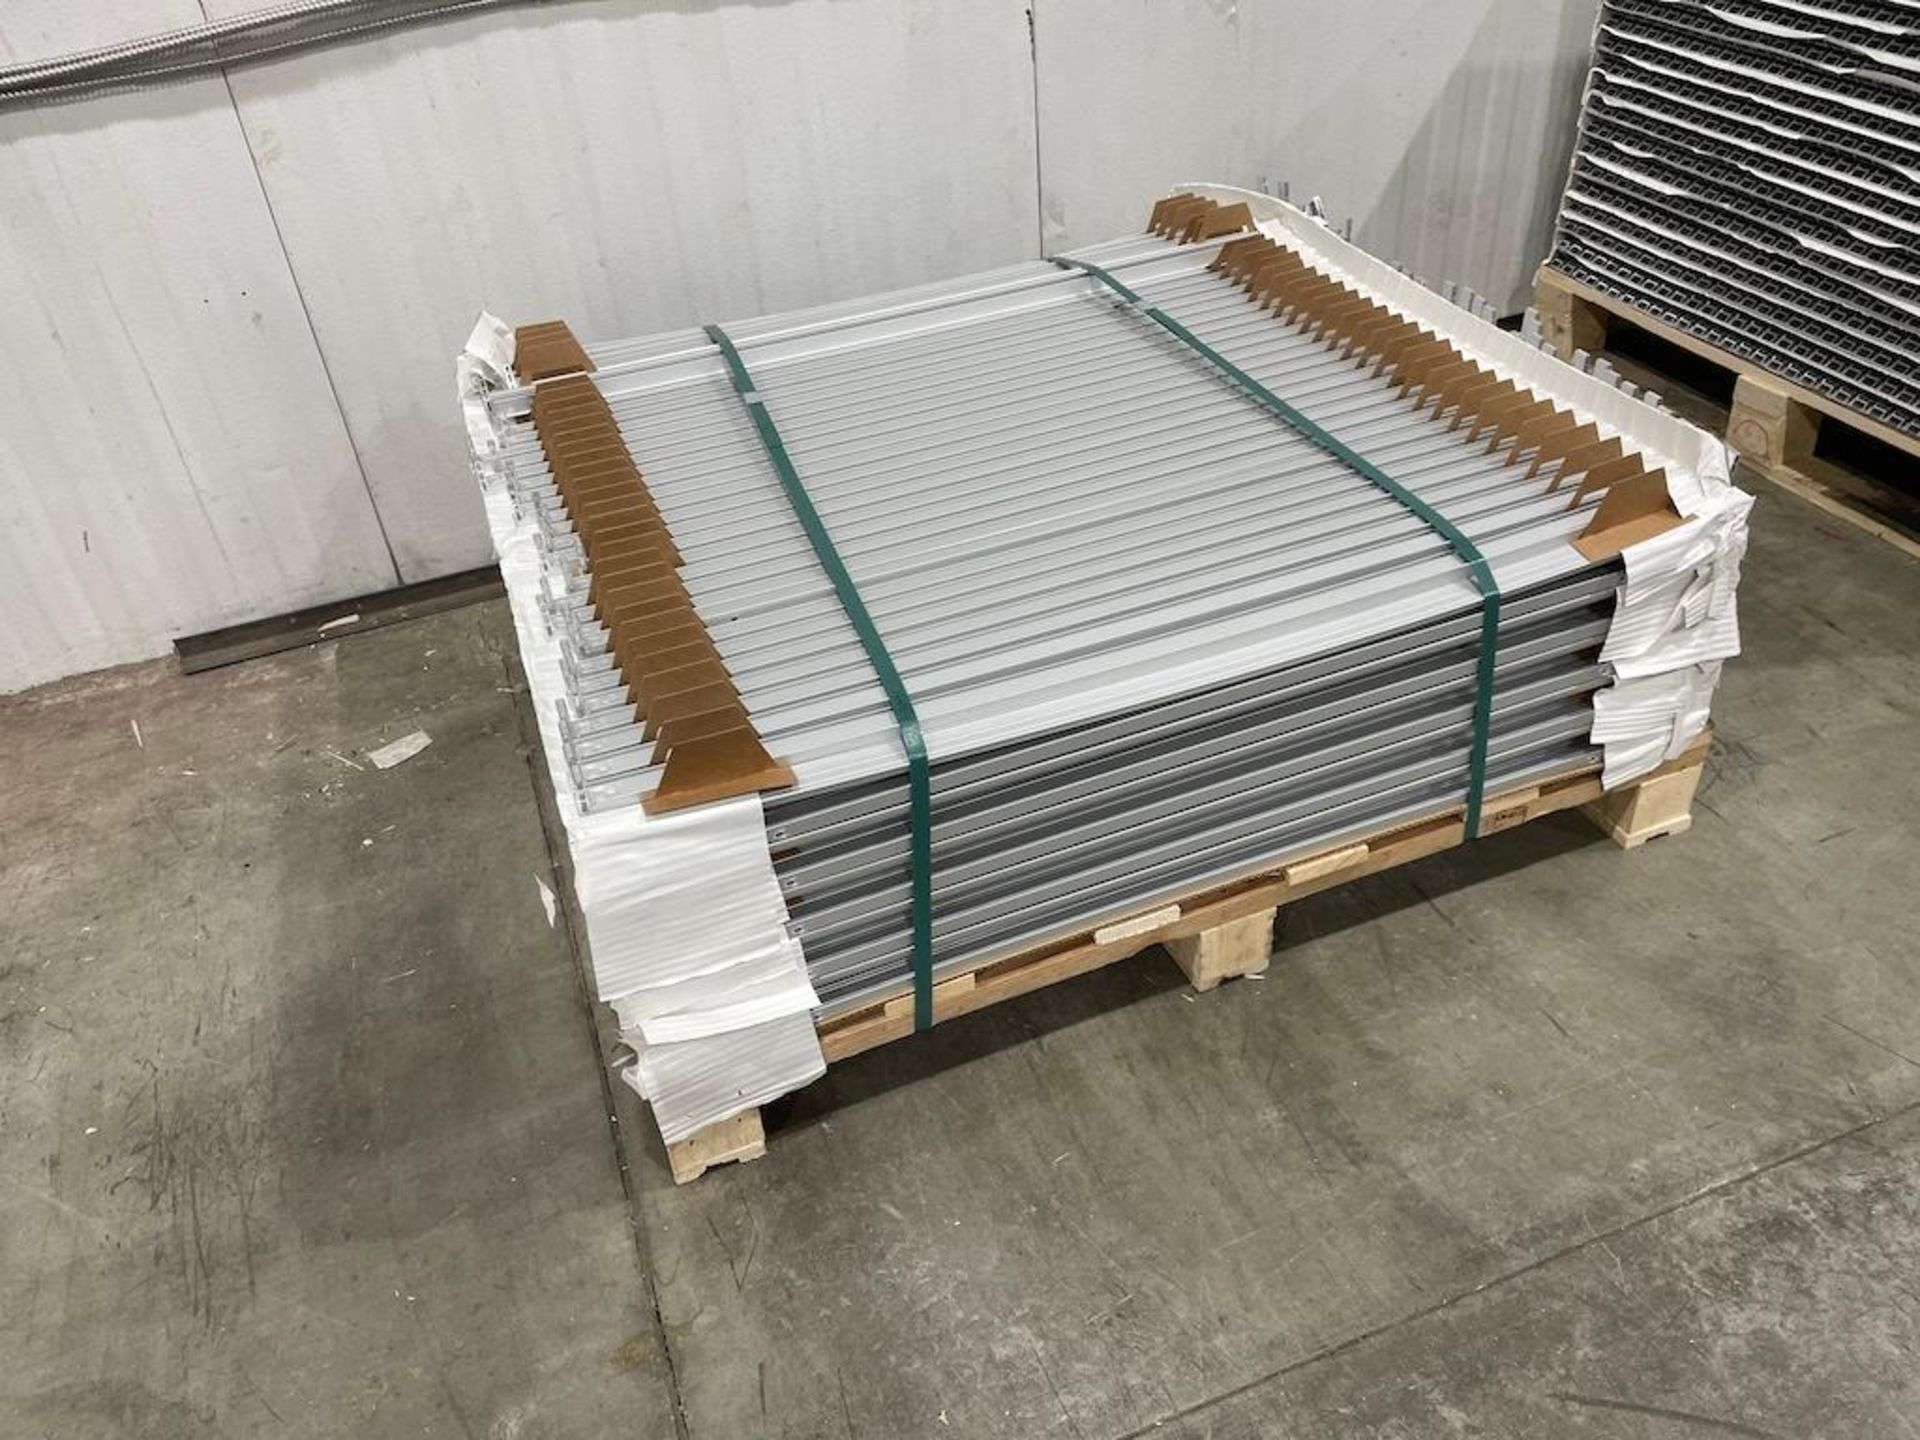 LOT (87) SKIDS ASSORTED ALUMINUM FRAME COMPONENTS / EXTRUSIONS INCLUDING: 87 SKIDS OF 1000 TO 1800 P - Image 9 of 11